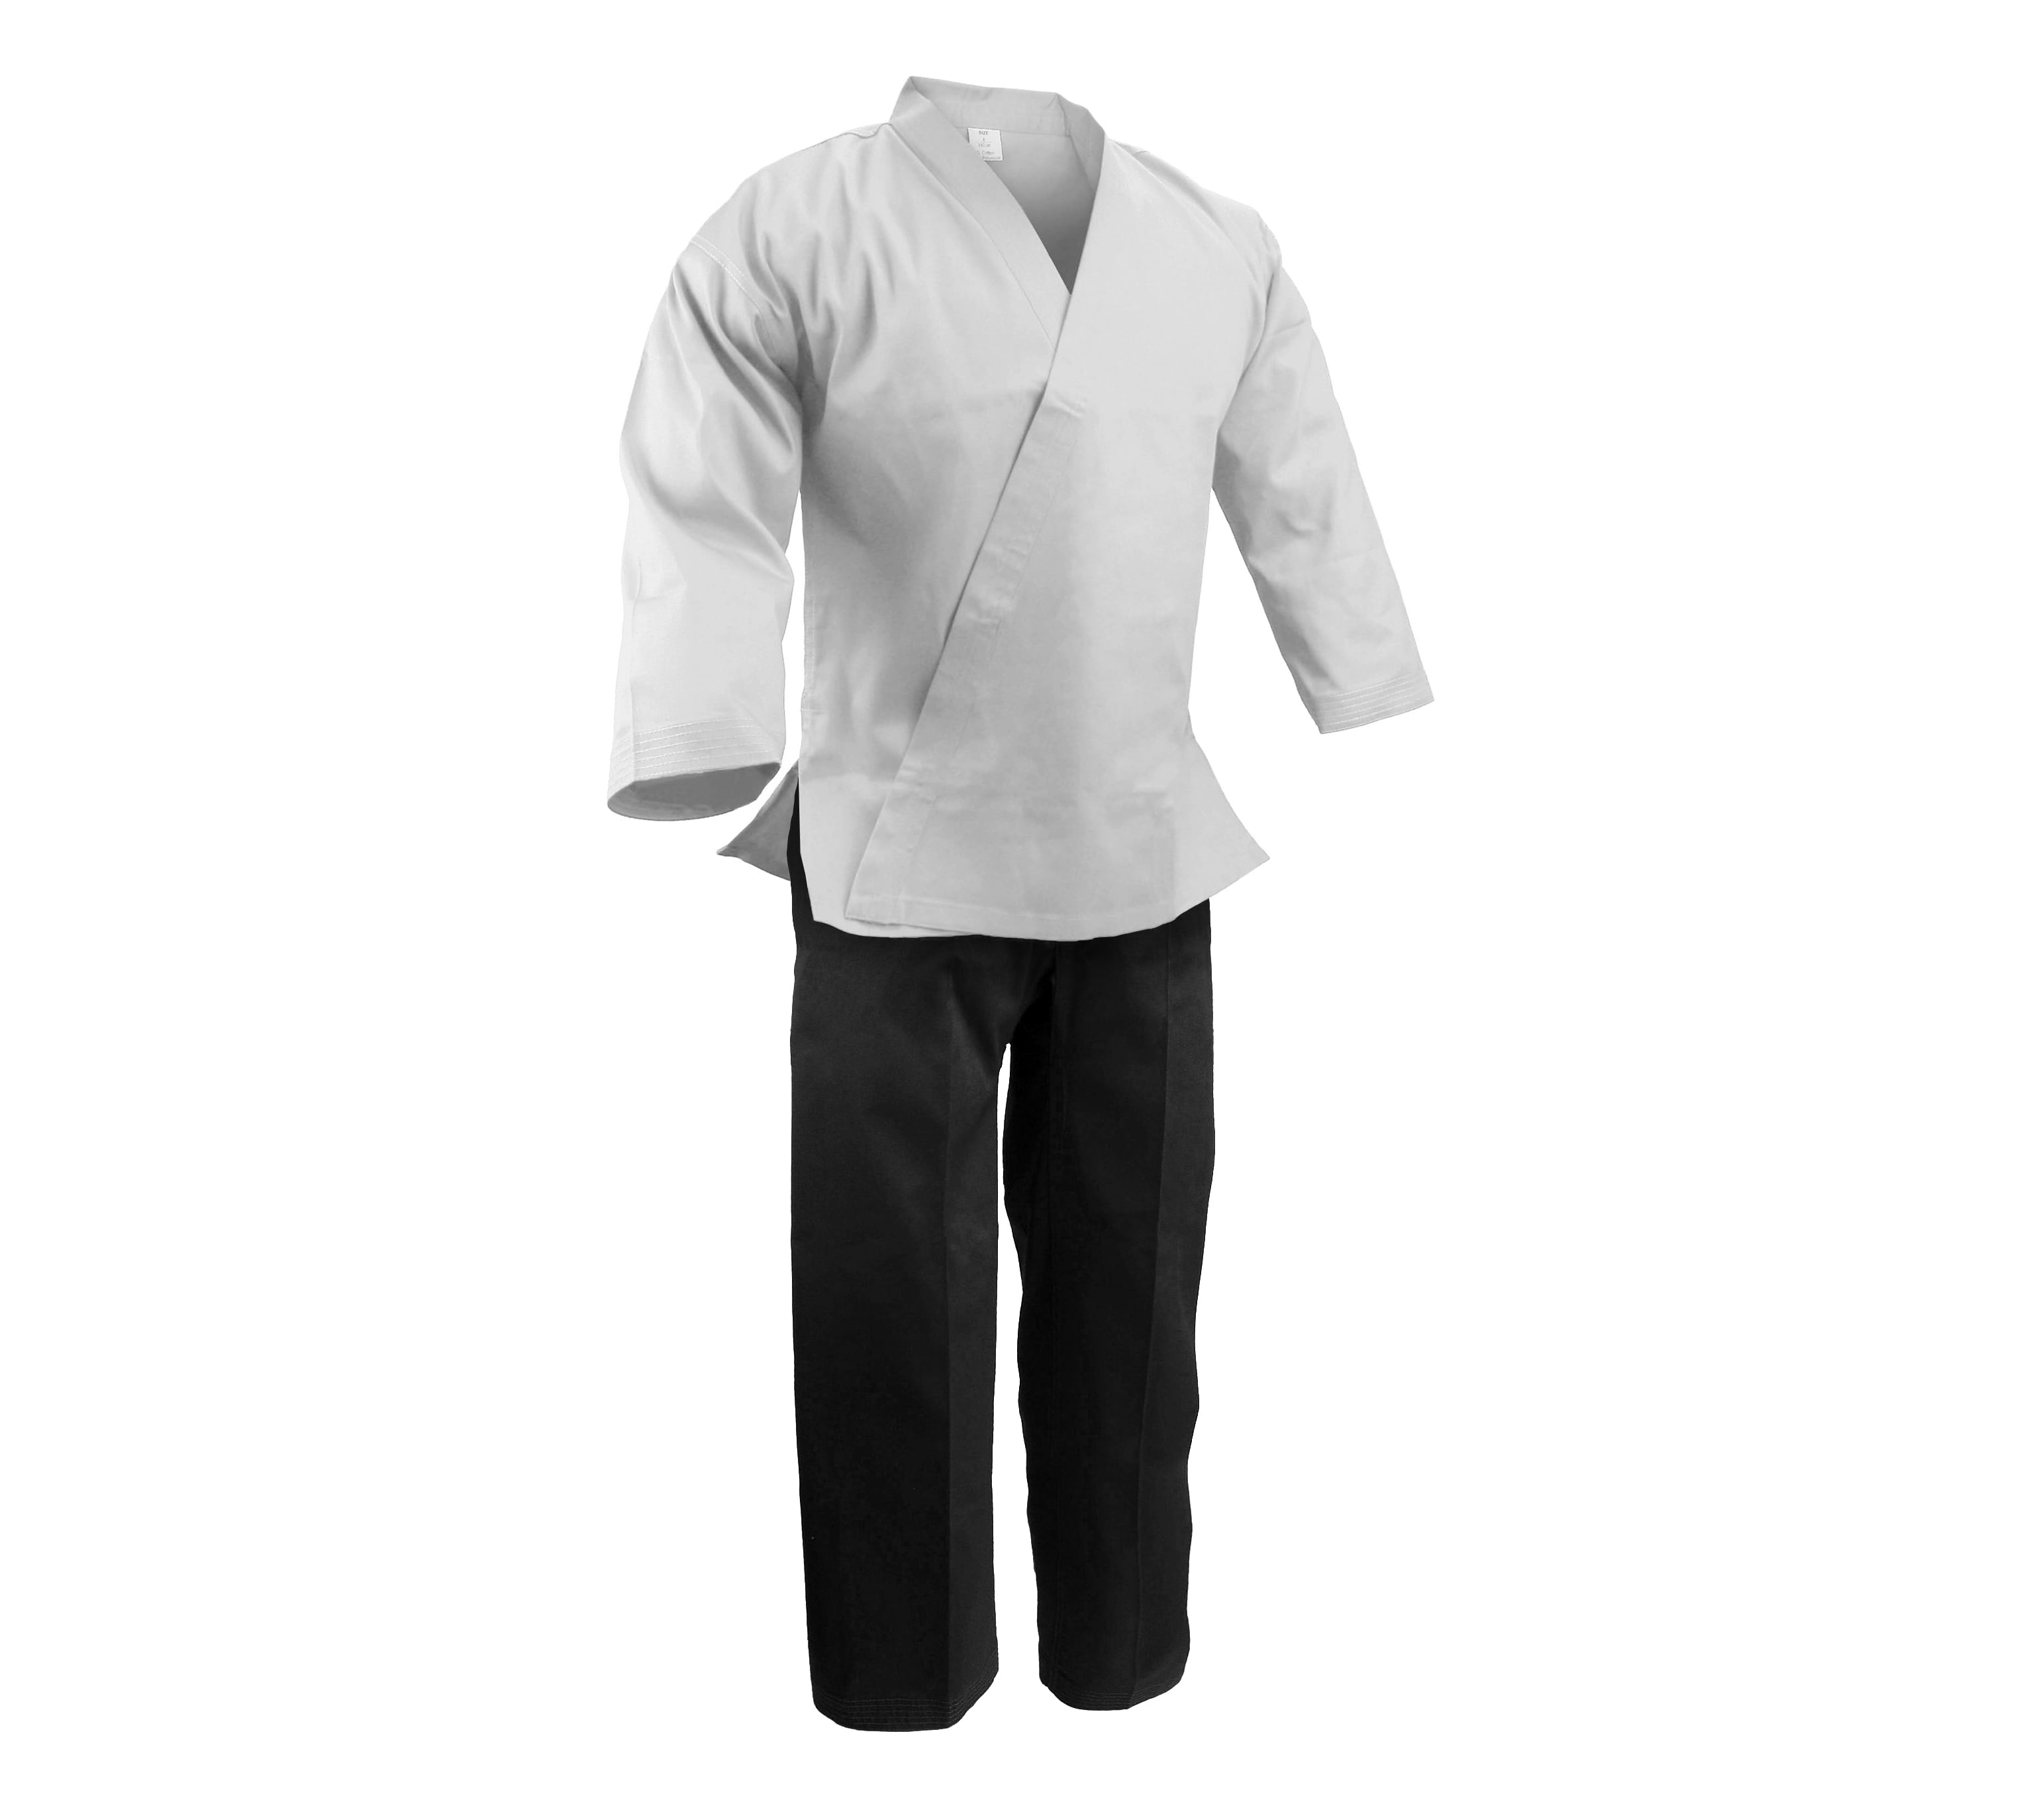 Details about   ISAMI Traditional Black KARATE GI  Jacket pants set Made in JAPAN ship by FedEx 